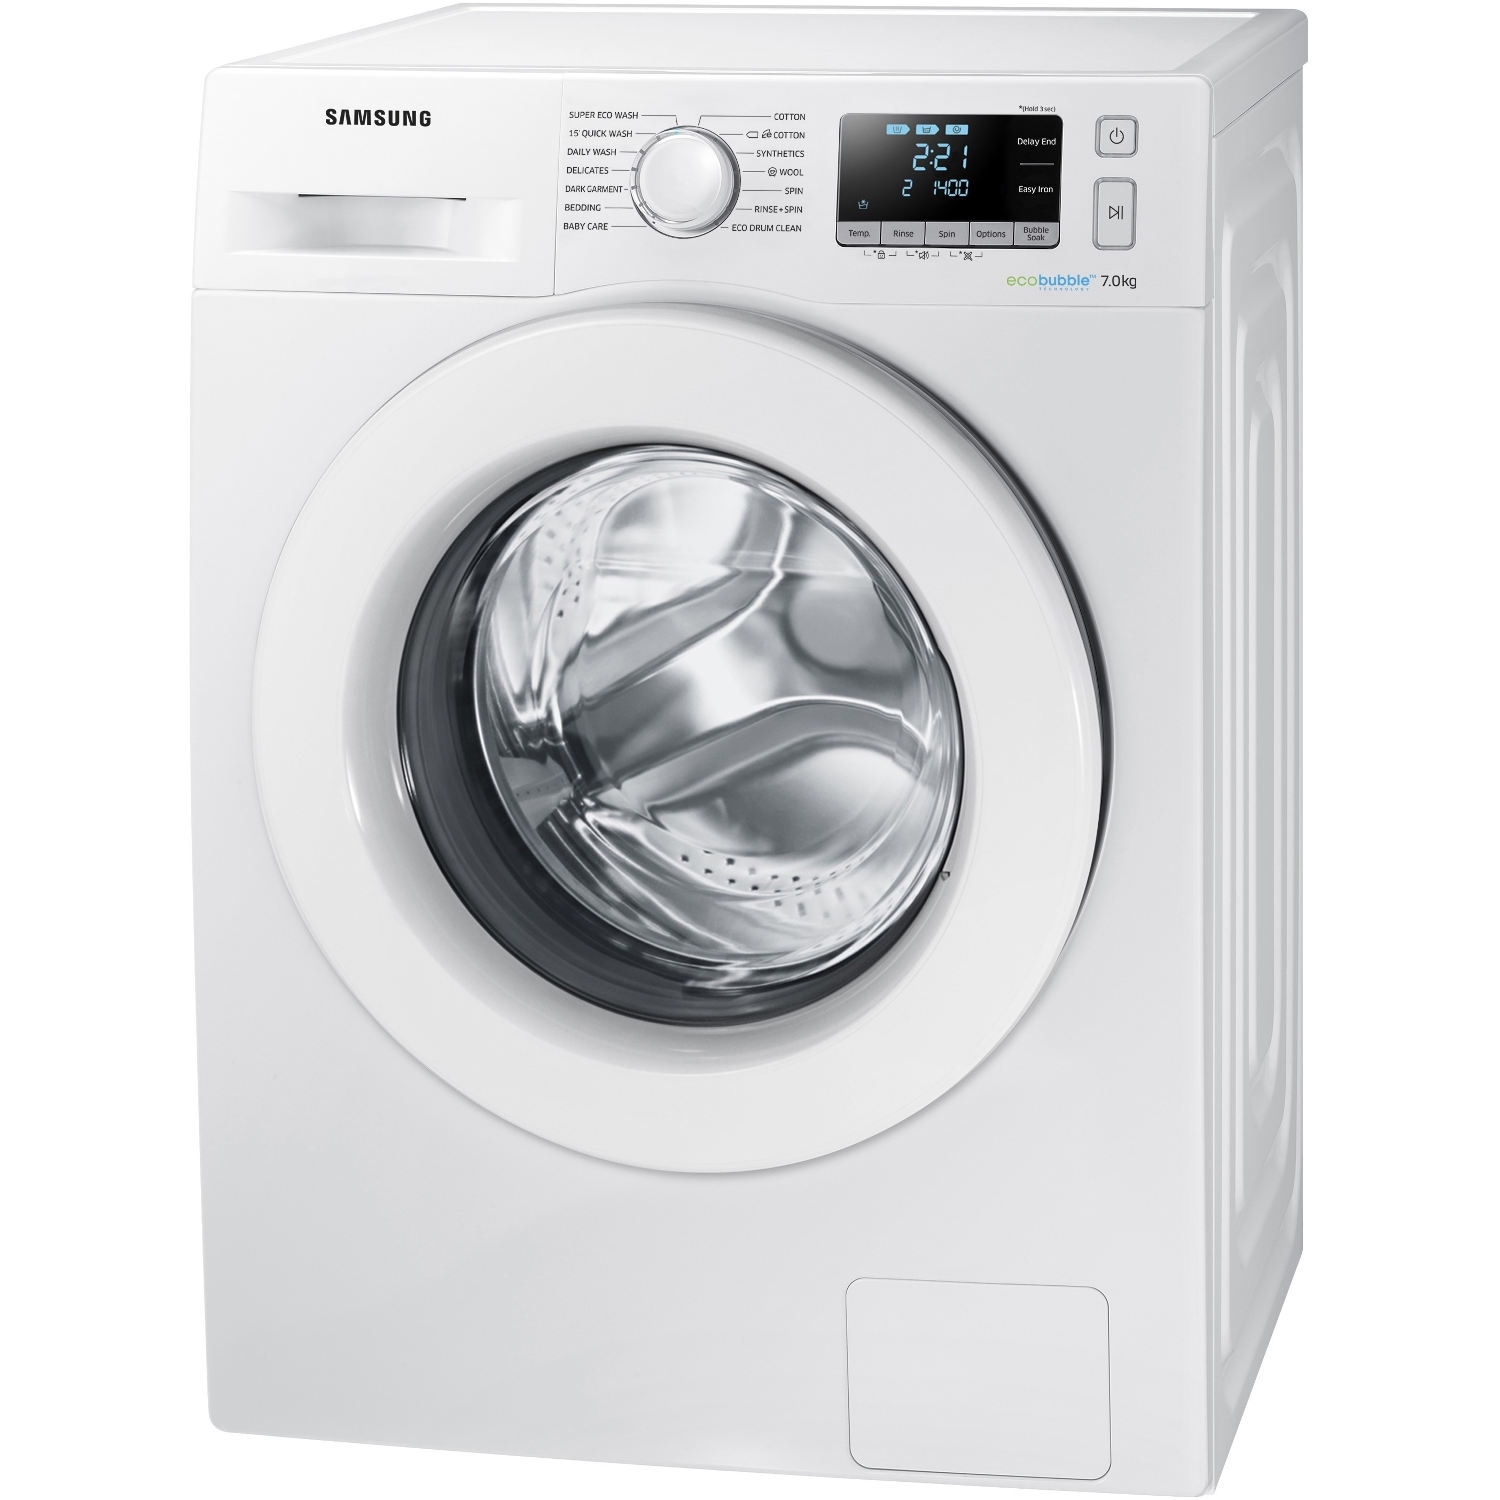 Samsung 7kg 1400 Spin Washing Machine - White - A+++ Rated - 1